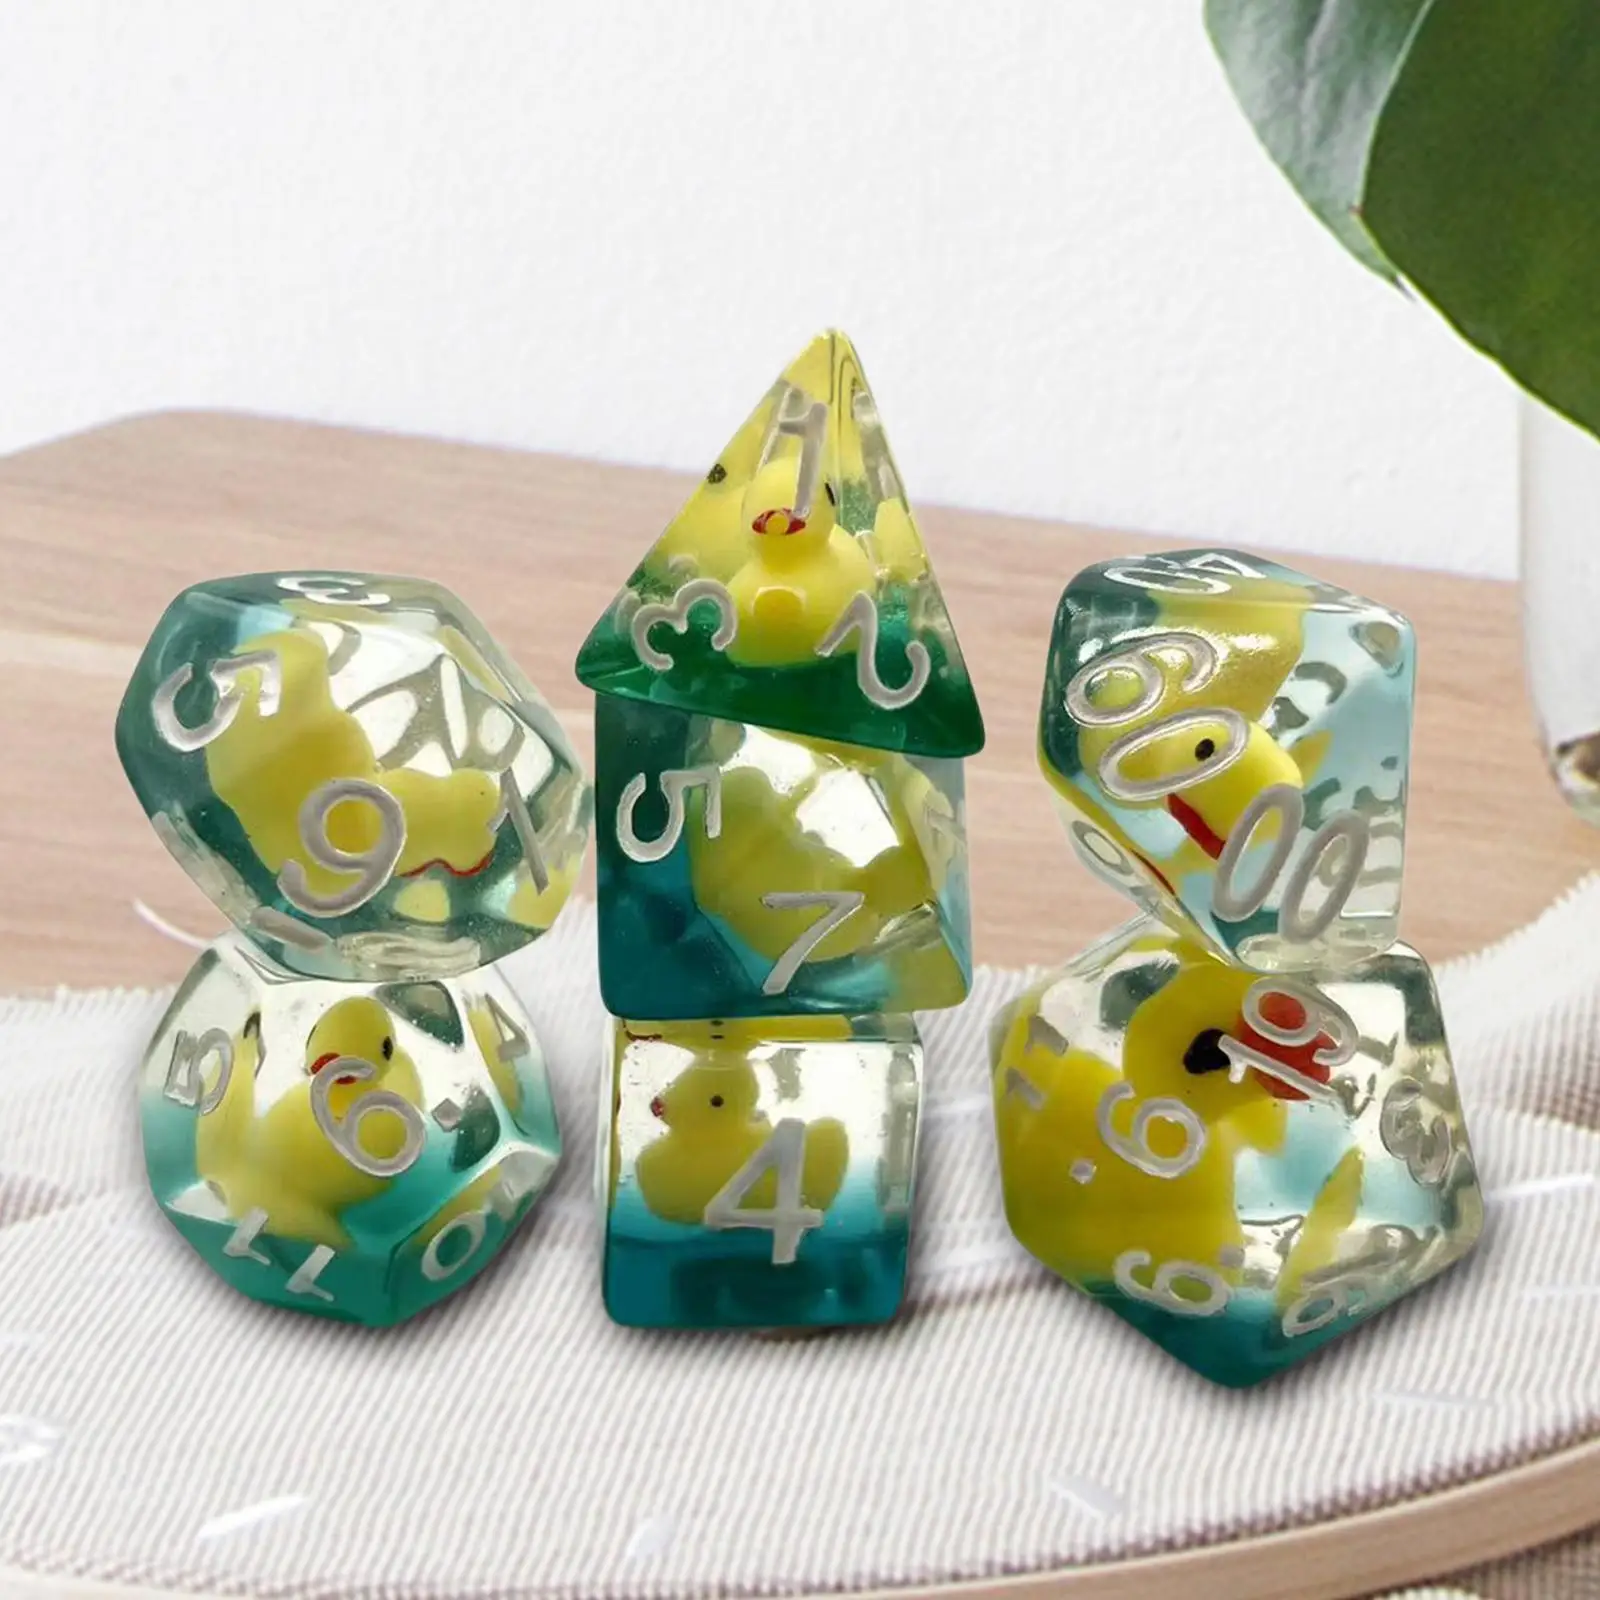 7Pcs Polyhedral Dices Set Entertainment Toys for Card Games Board Game Classroom Accessories